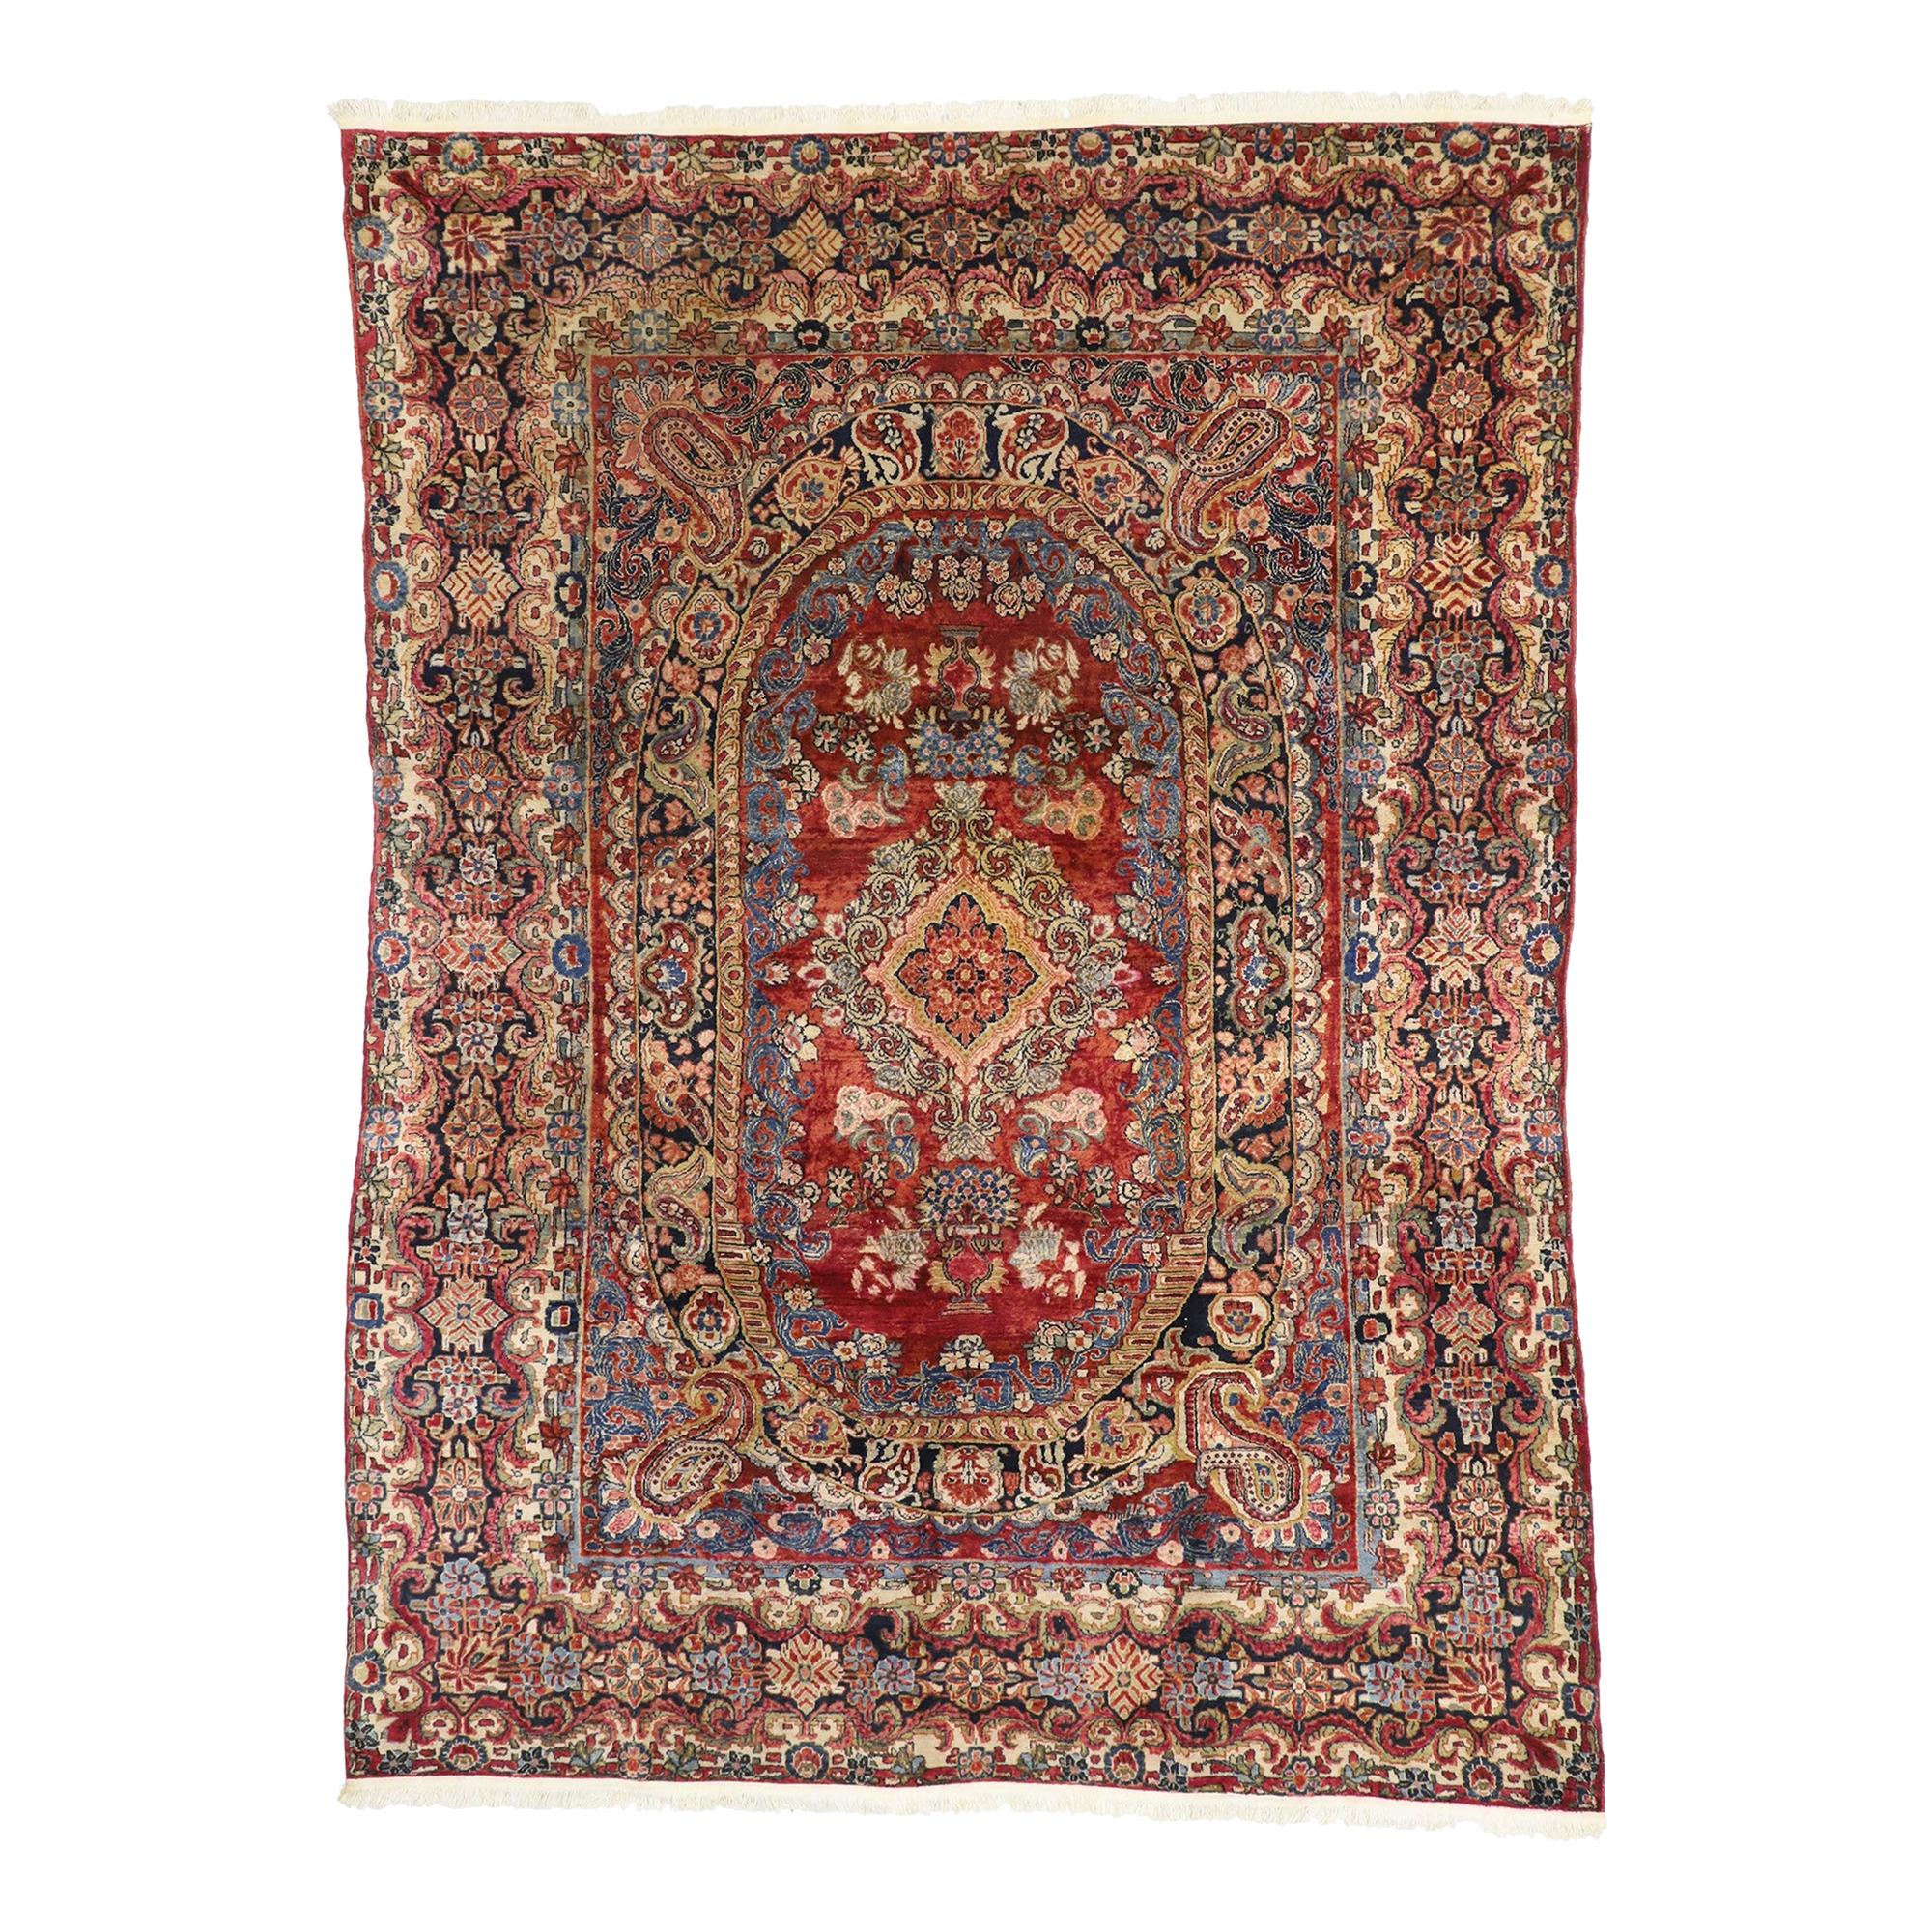 Antique Persian Sarouk Rug with Floral Victorian Style